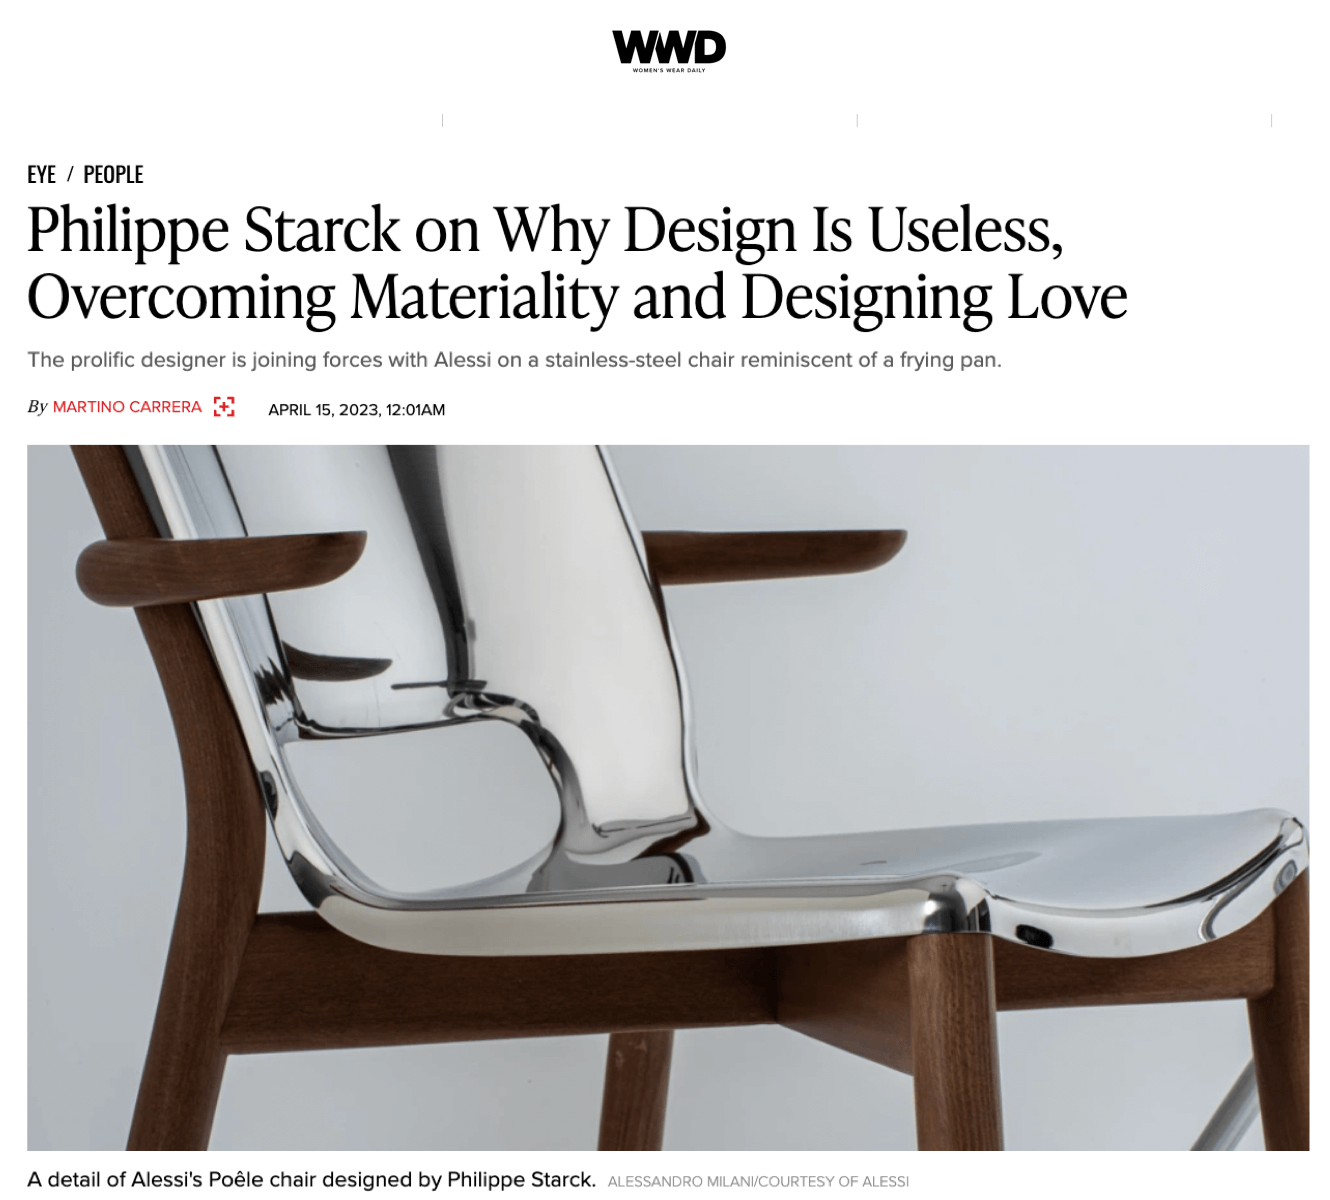 Philippe Starck on Why Design Is Useless, Overcoming Materiality and Designing Love